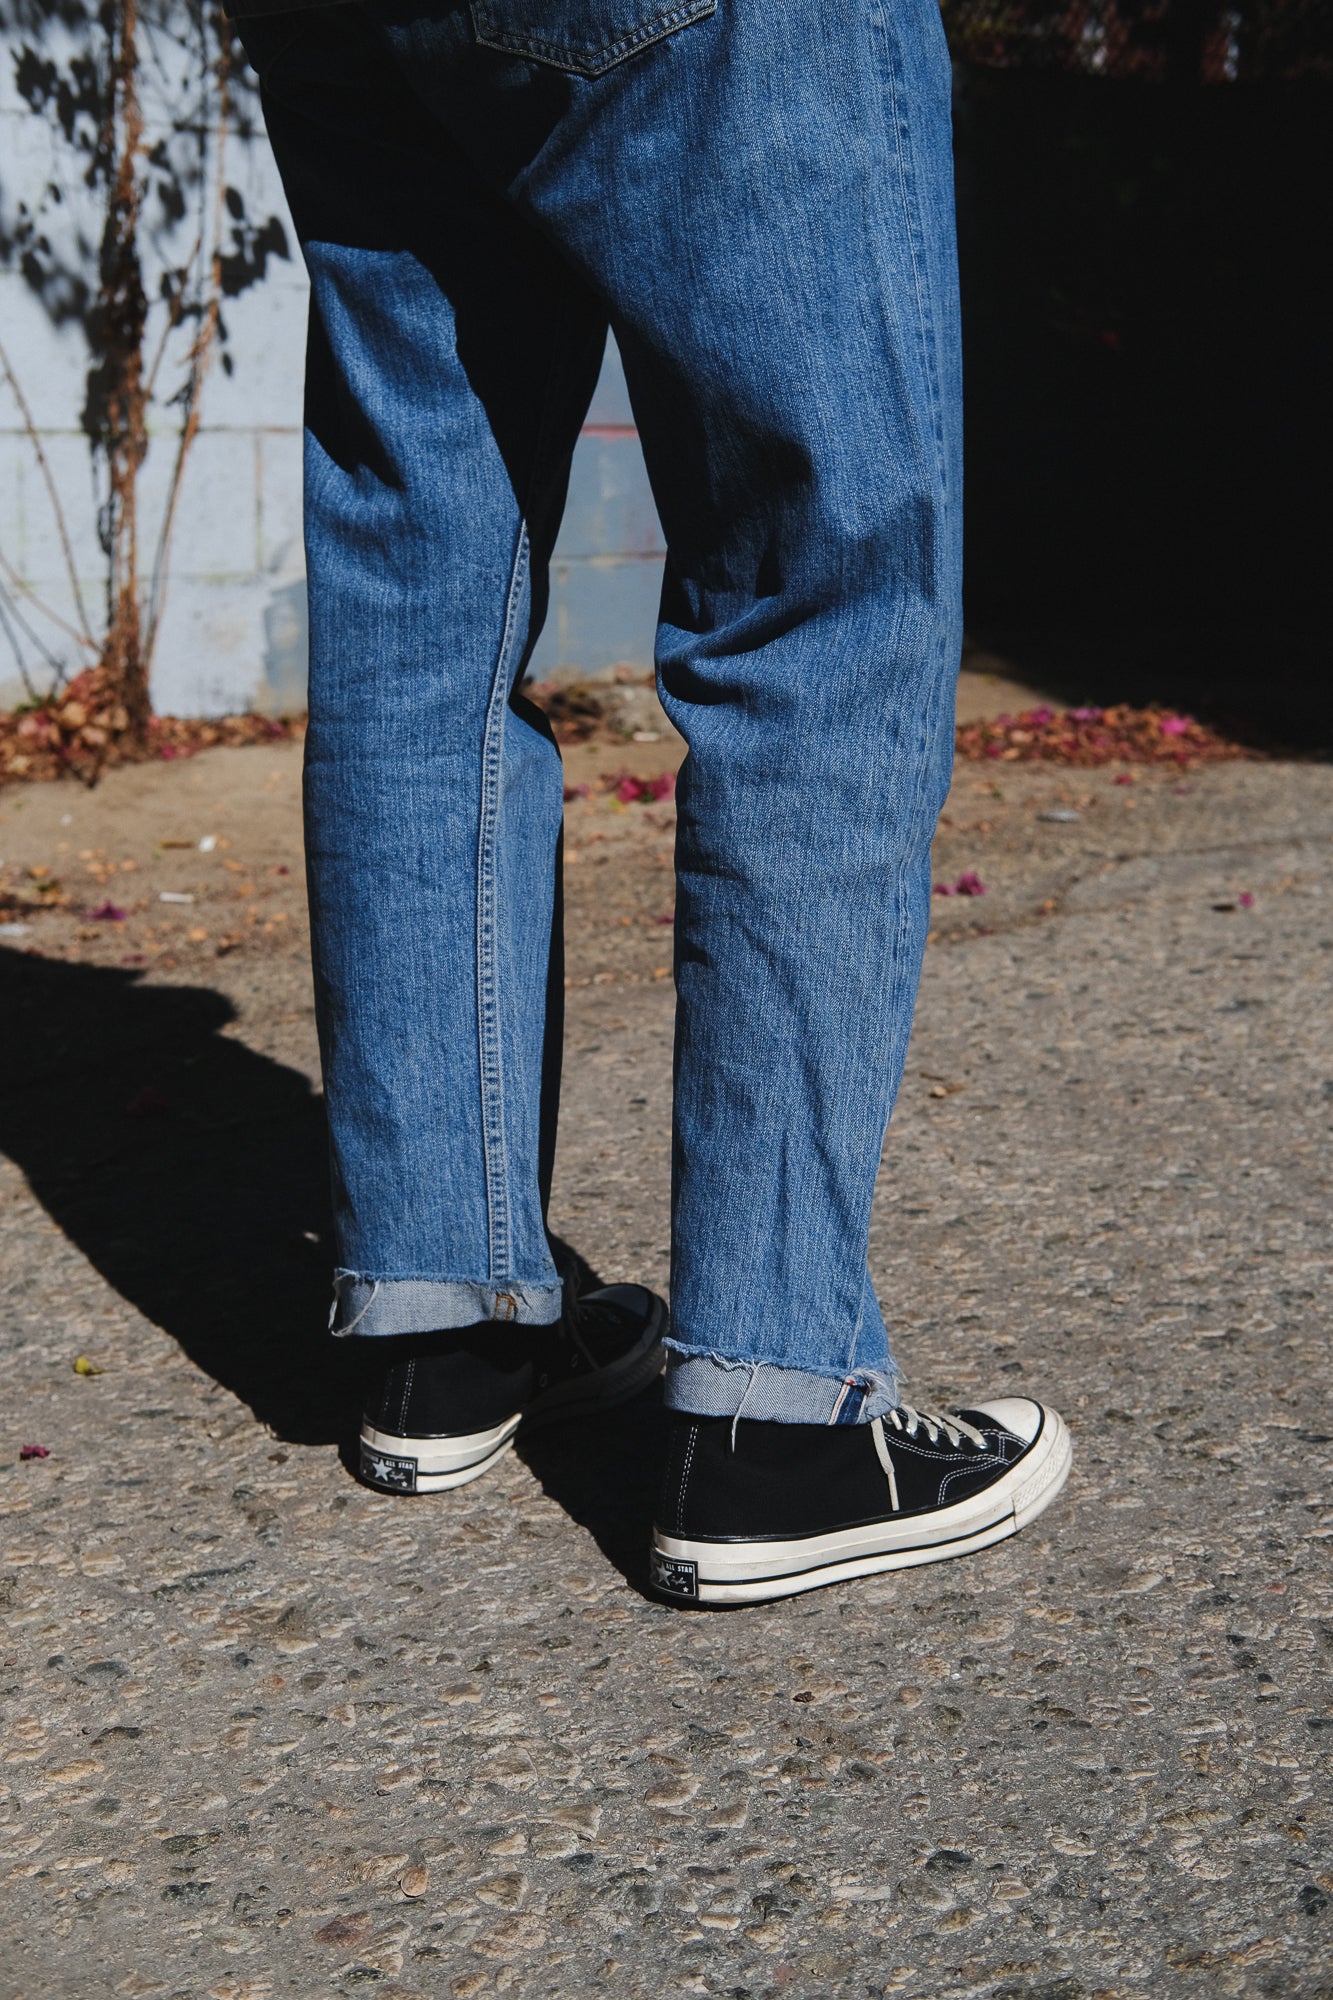 A pair of stonewashed jeans worn with black Converse sneakers.